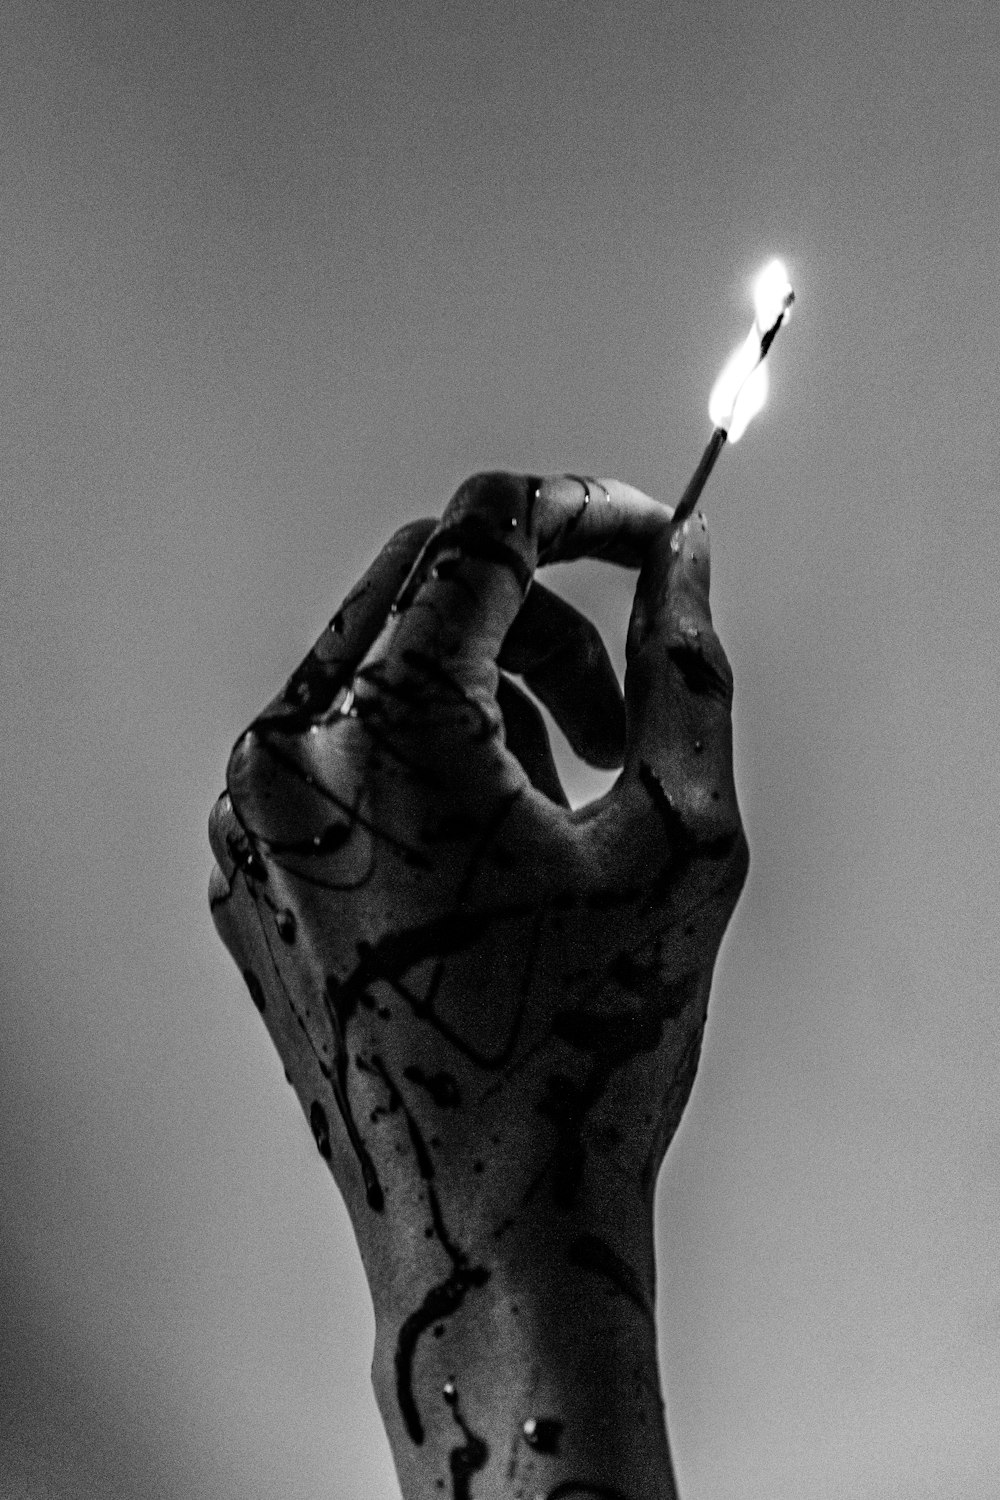 grayscale photo of person holding lighted match stick